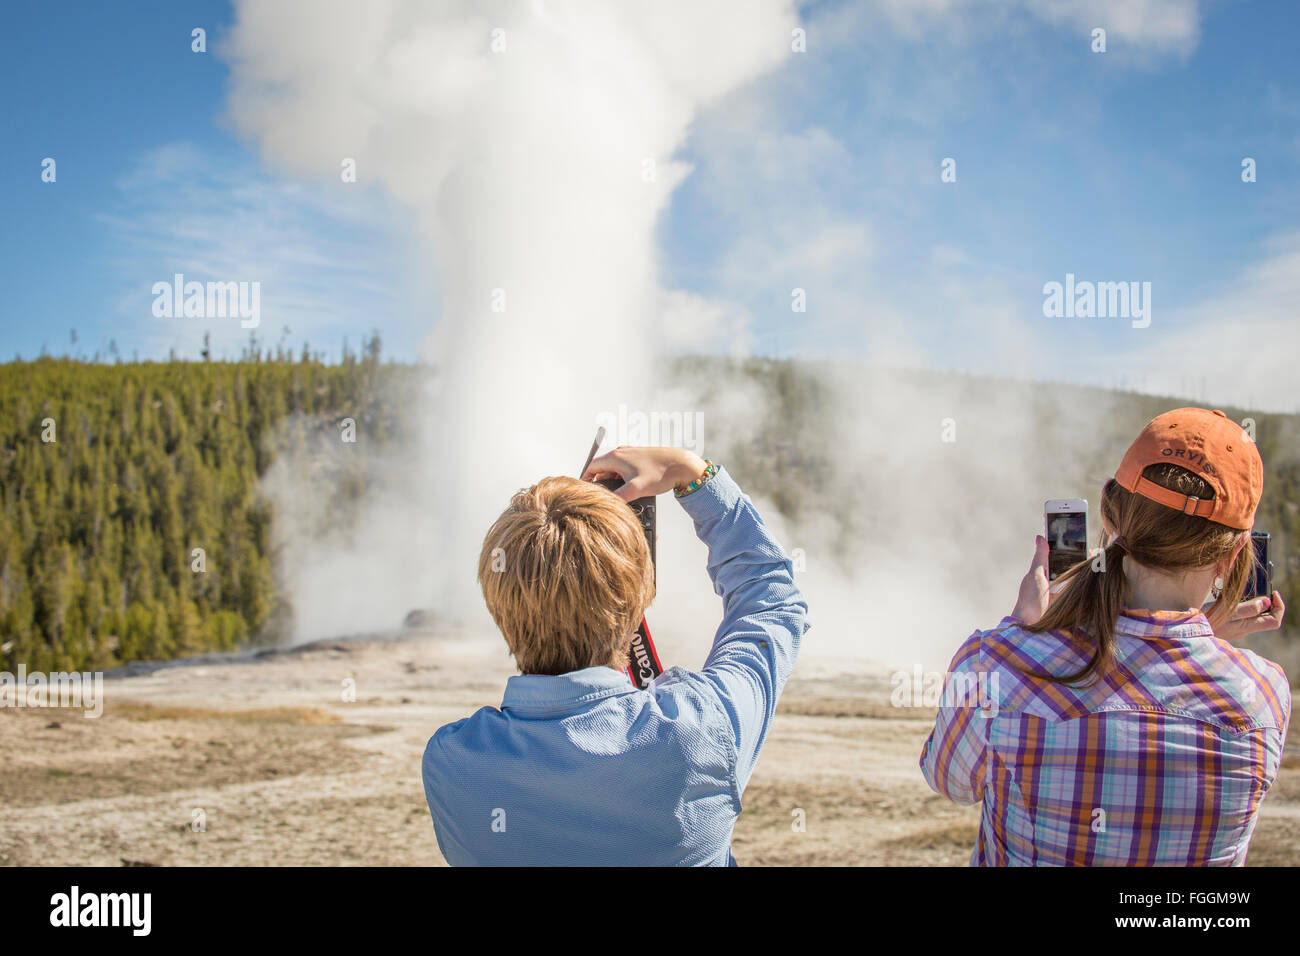 Two young women take cell phone photographs of Old Faithful. Stock Photo